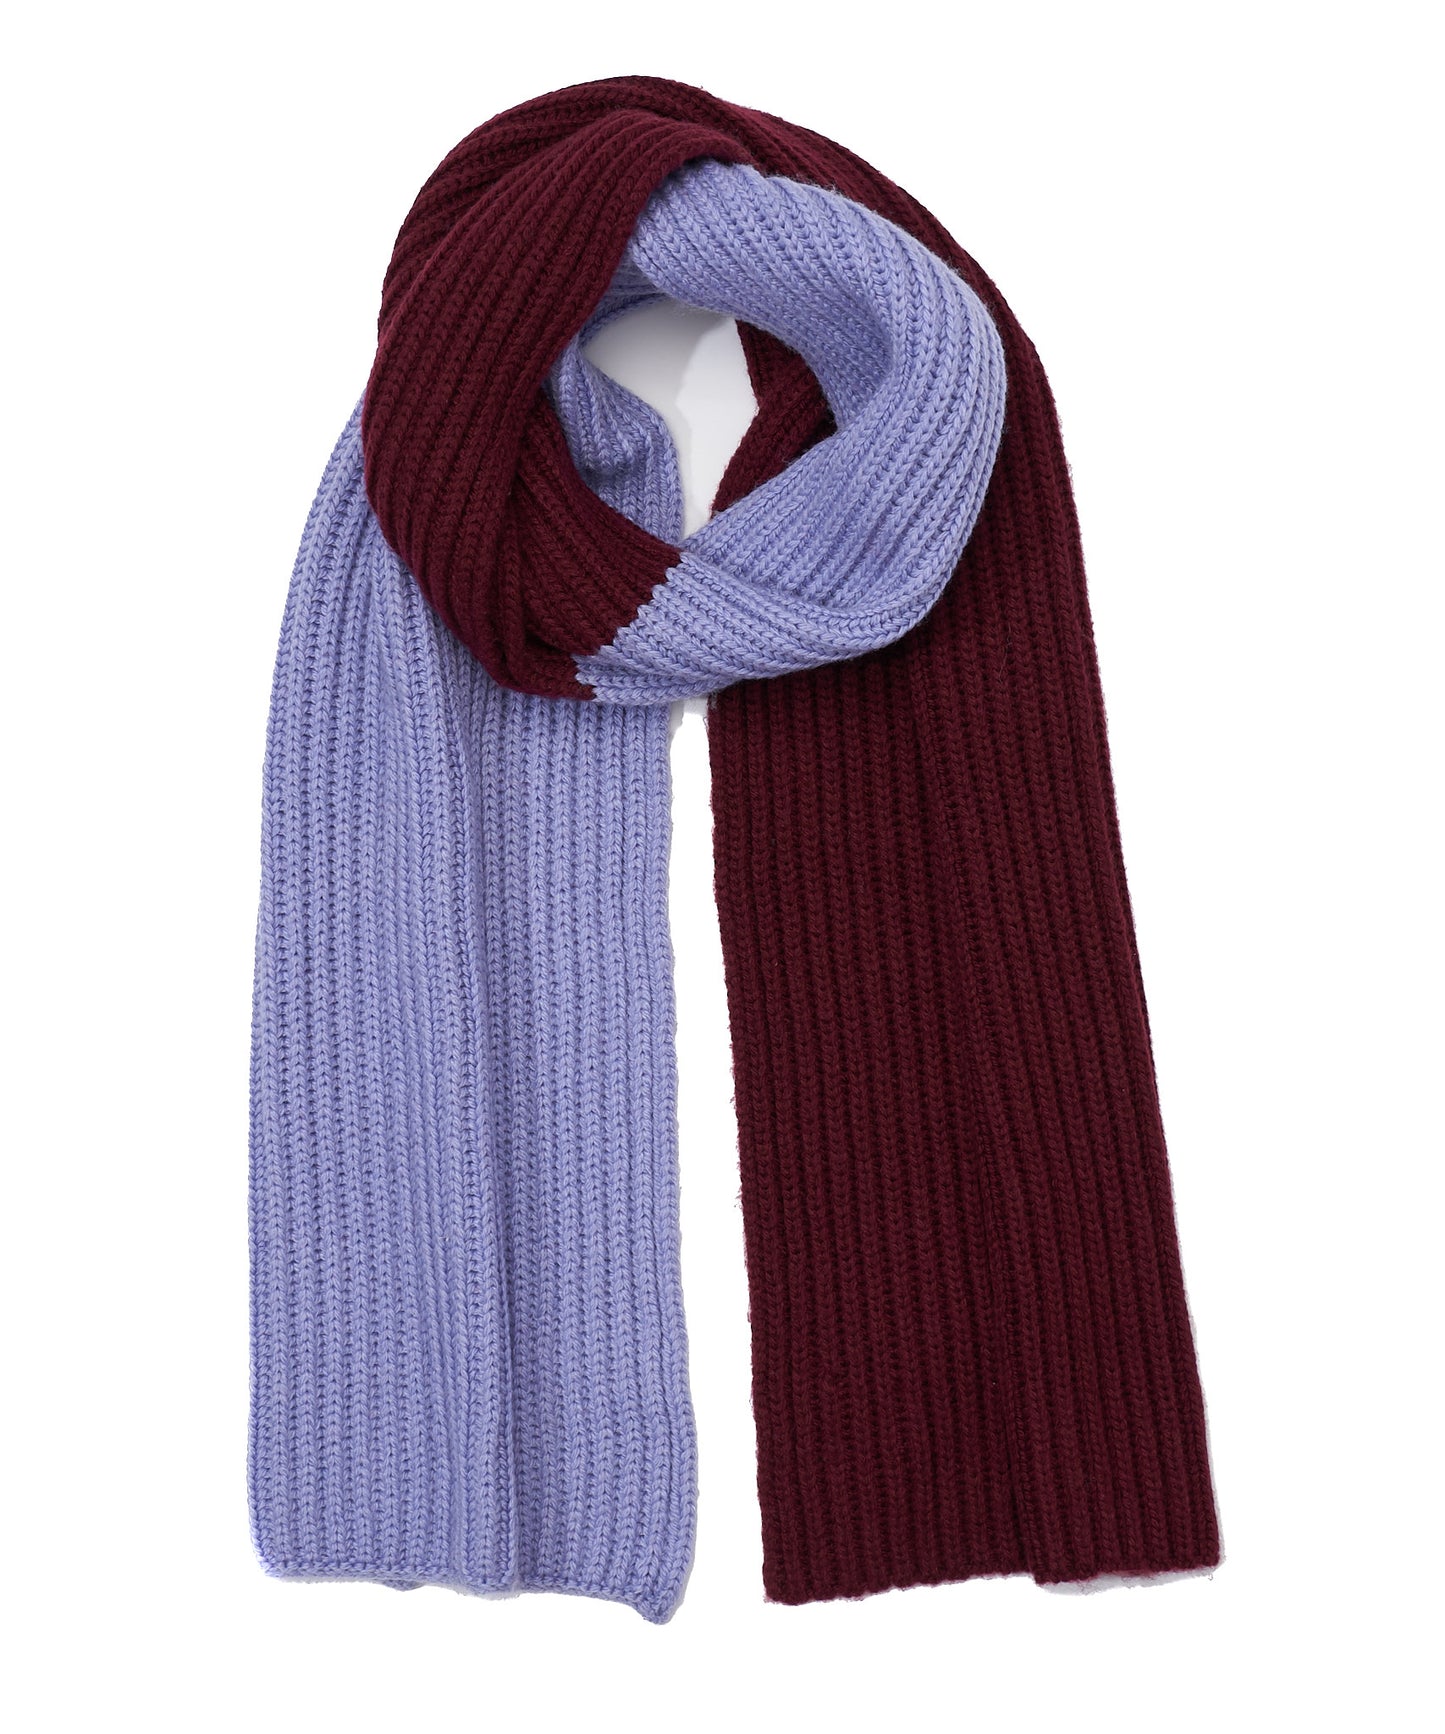 Colorbblock Rib Scarf in color Mulled Wine